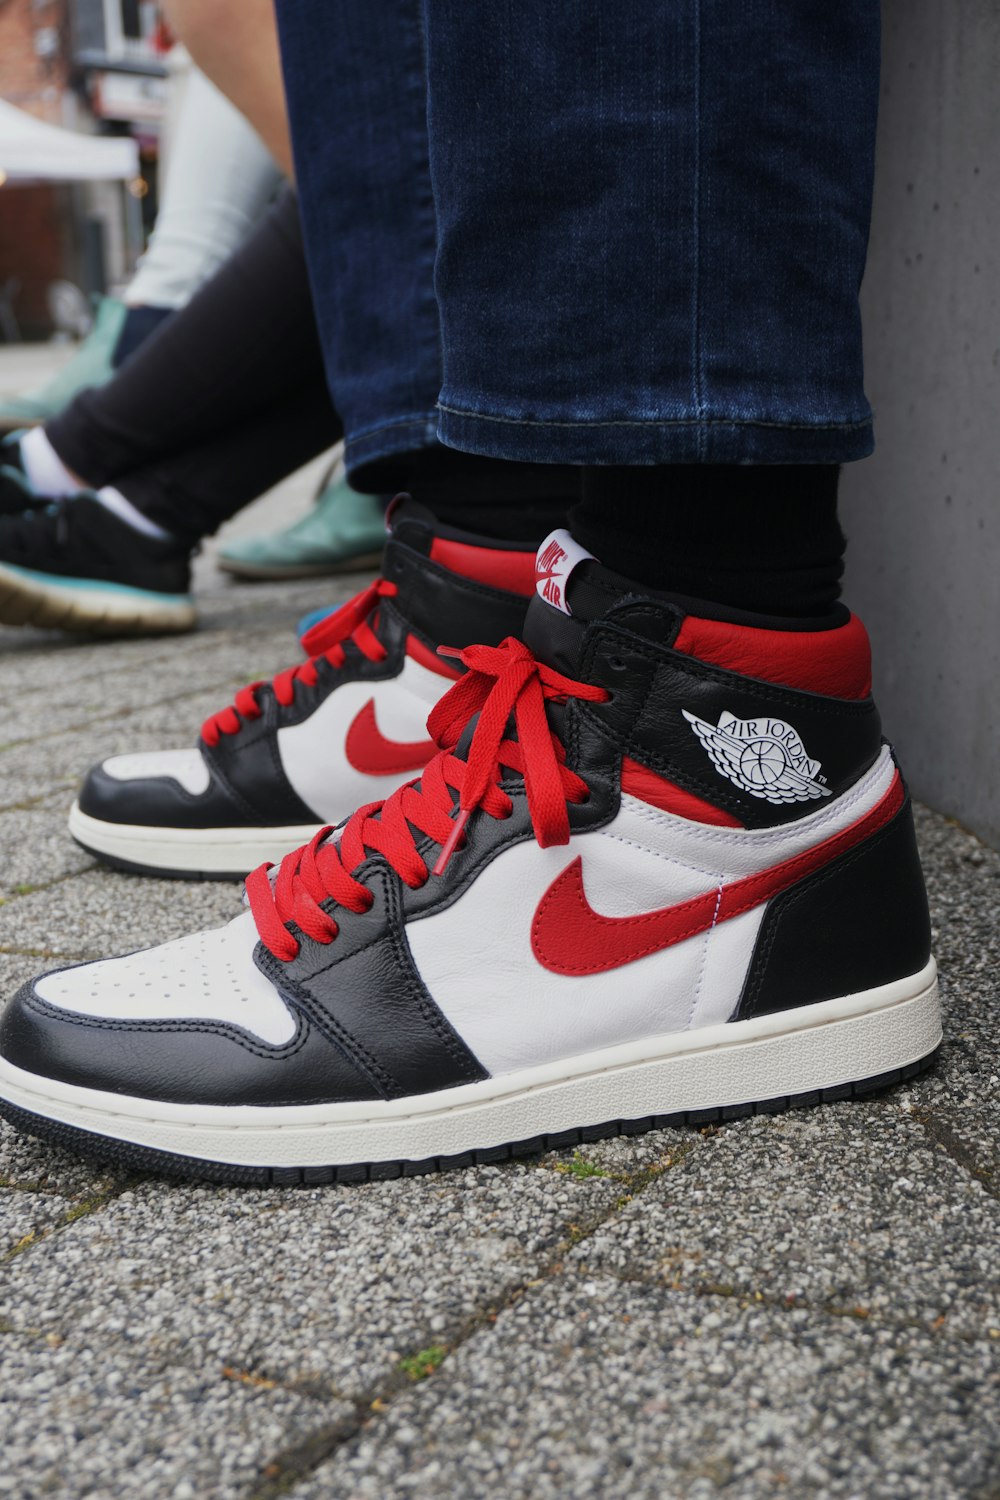 Person wearing black white and red nike air jordan 1 shoes photo – Free  Apparel Image on Unsplash